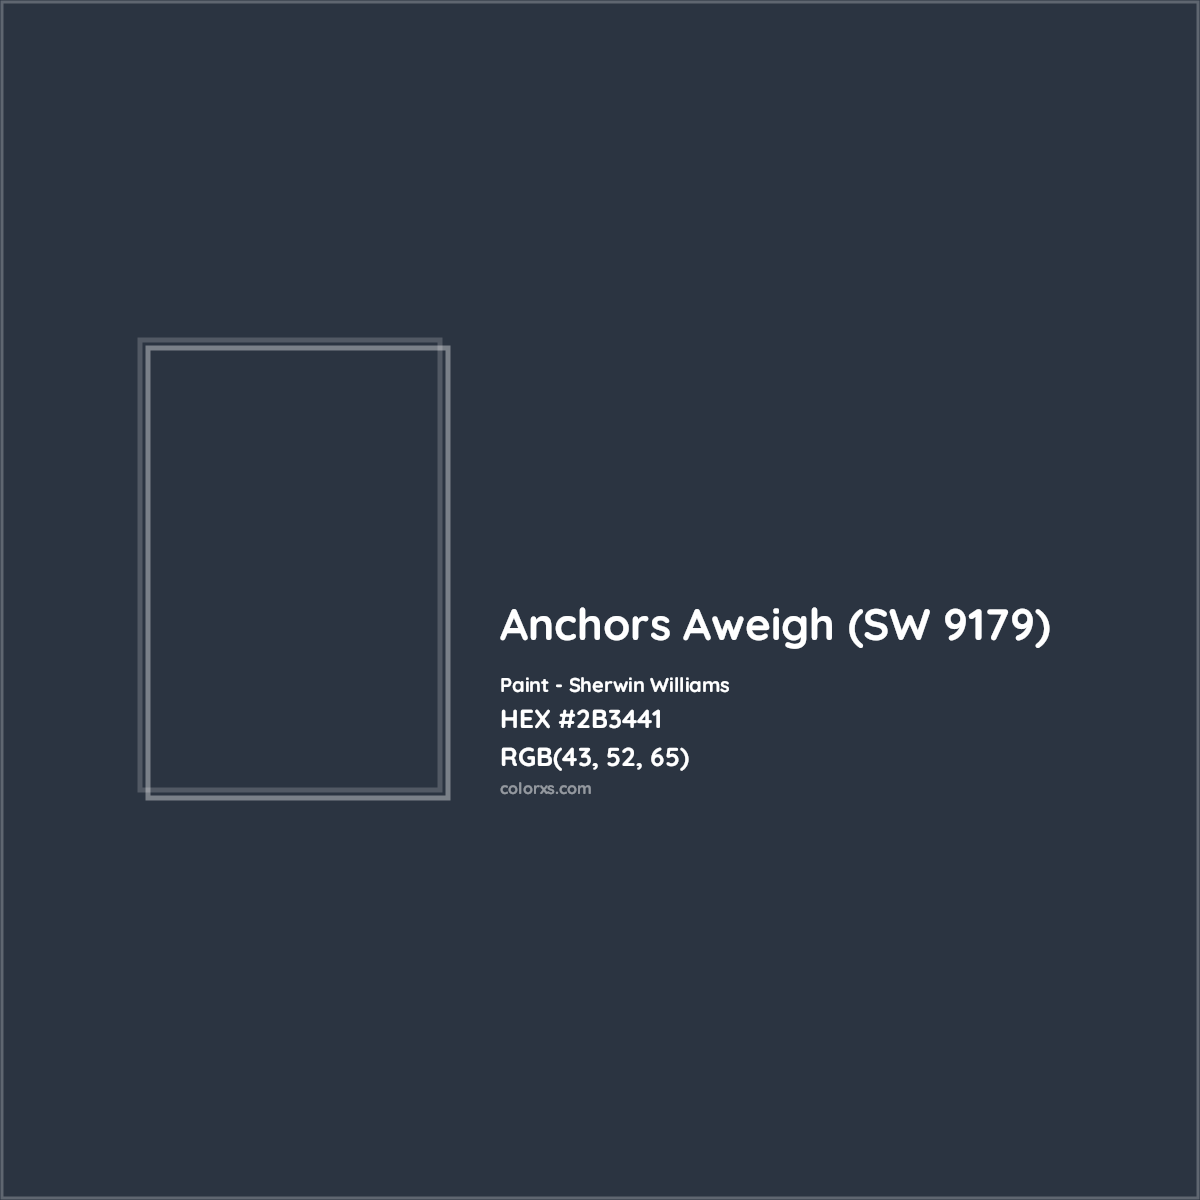 HEX #2B3441 Anchors Aweigh (SW 9179) Paint Sherwin Williams - Color Code